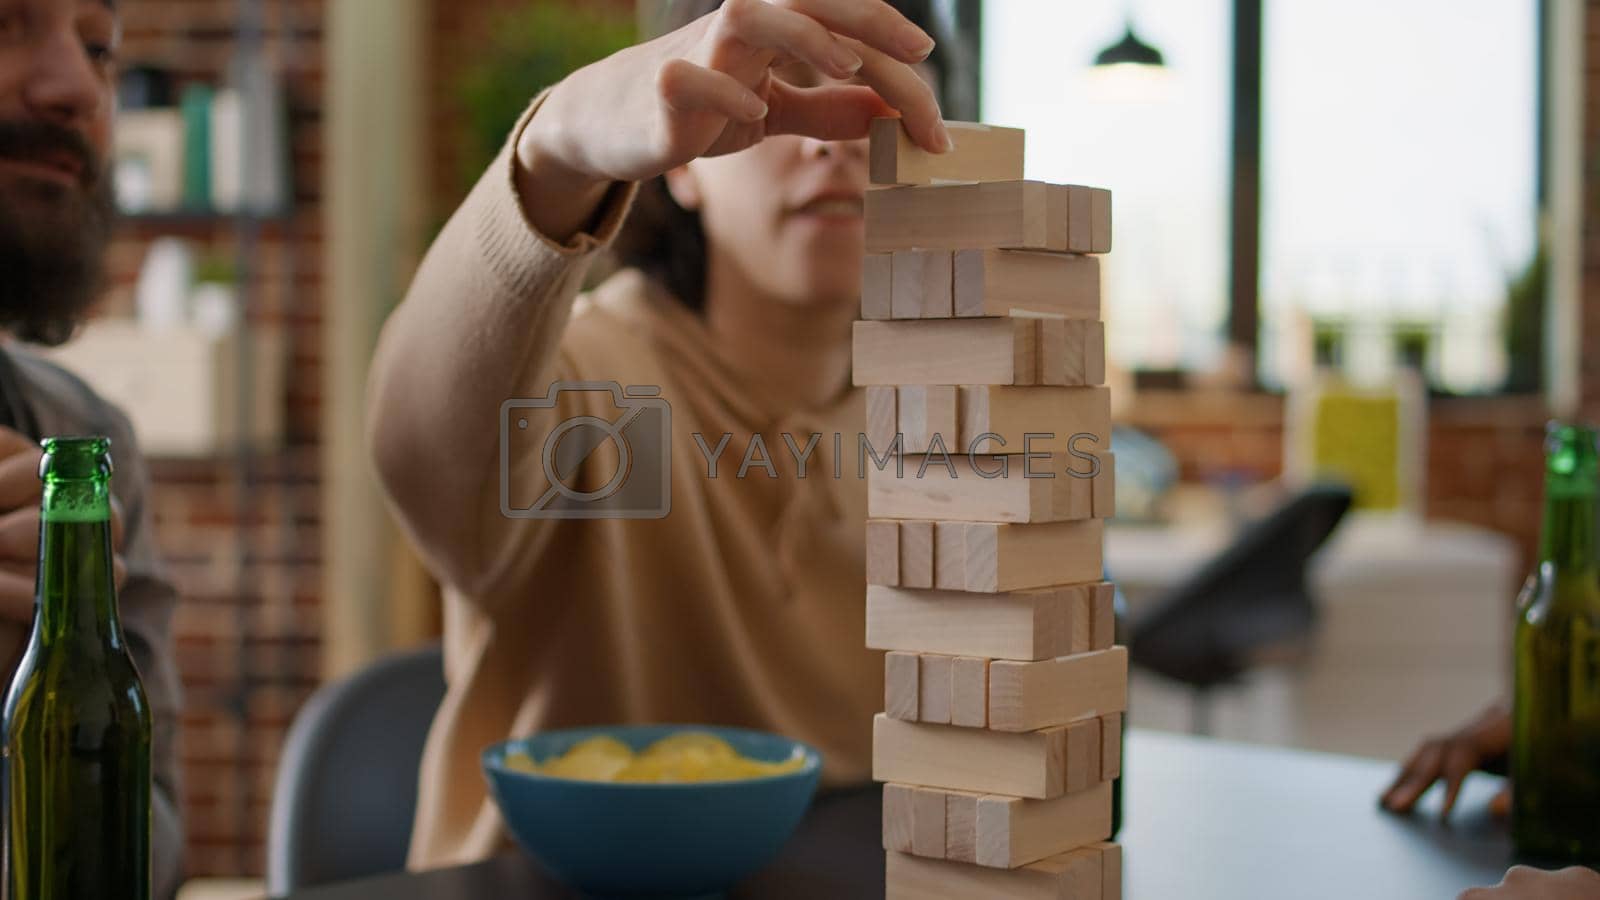 Happy people having fun with wooden tower on table, playing with building blocks structure and square pieces together. Friends enjoying society games pasttime activity laughing.